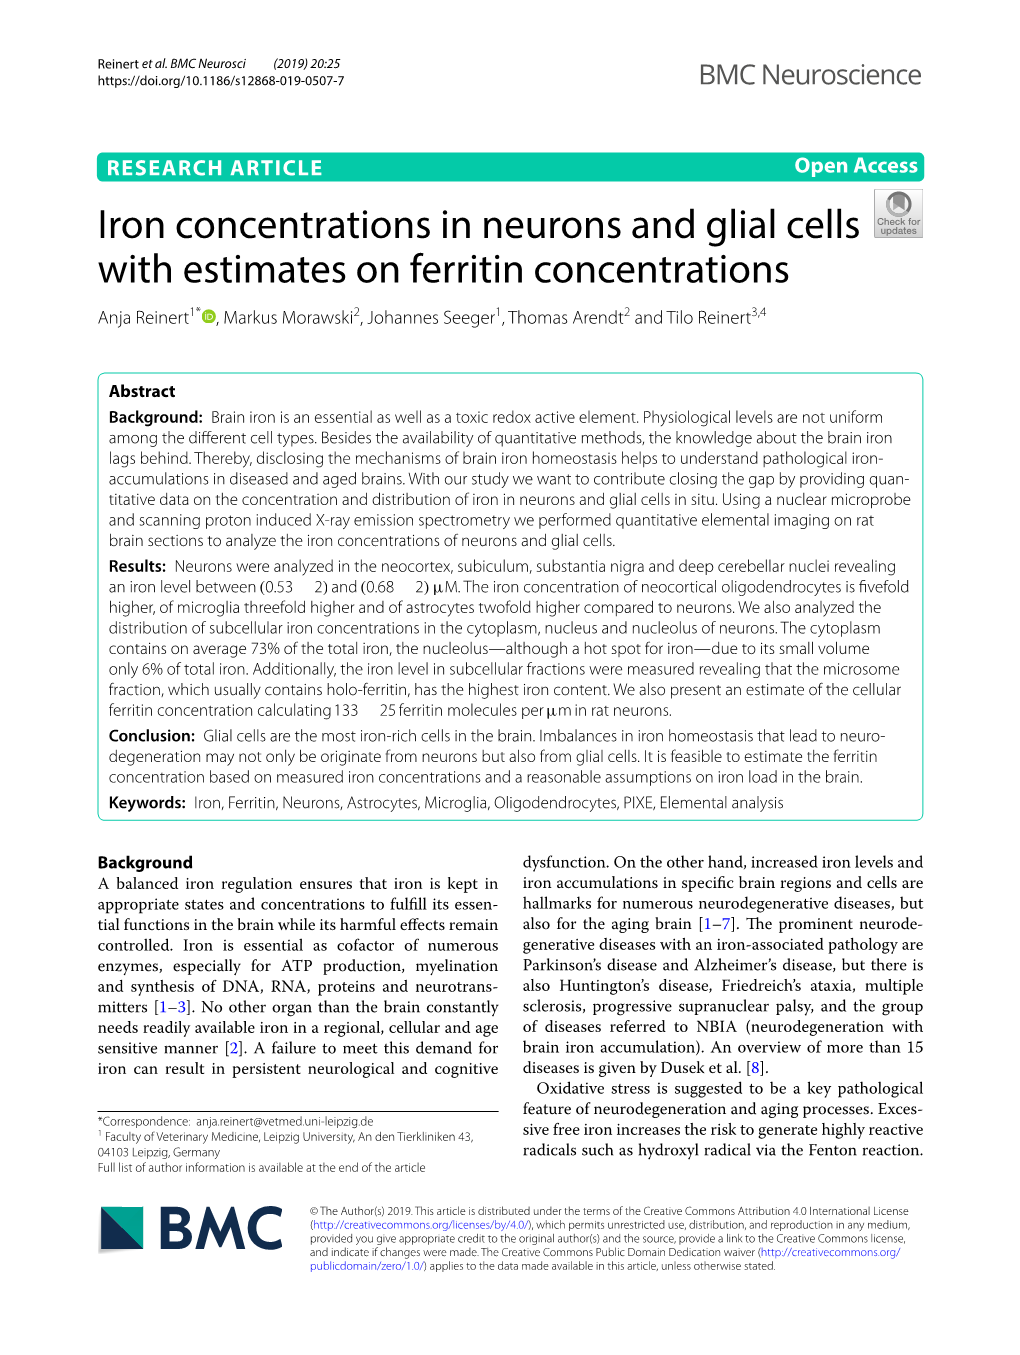 Iron Concentrations in Neurons and Glial Cells with Estimates on Ferritin